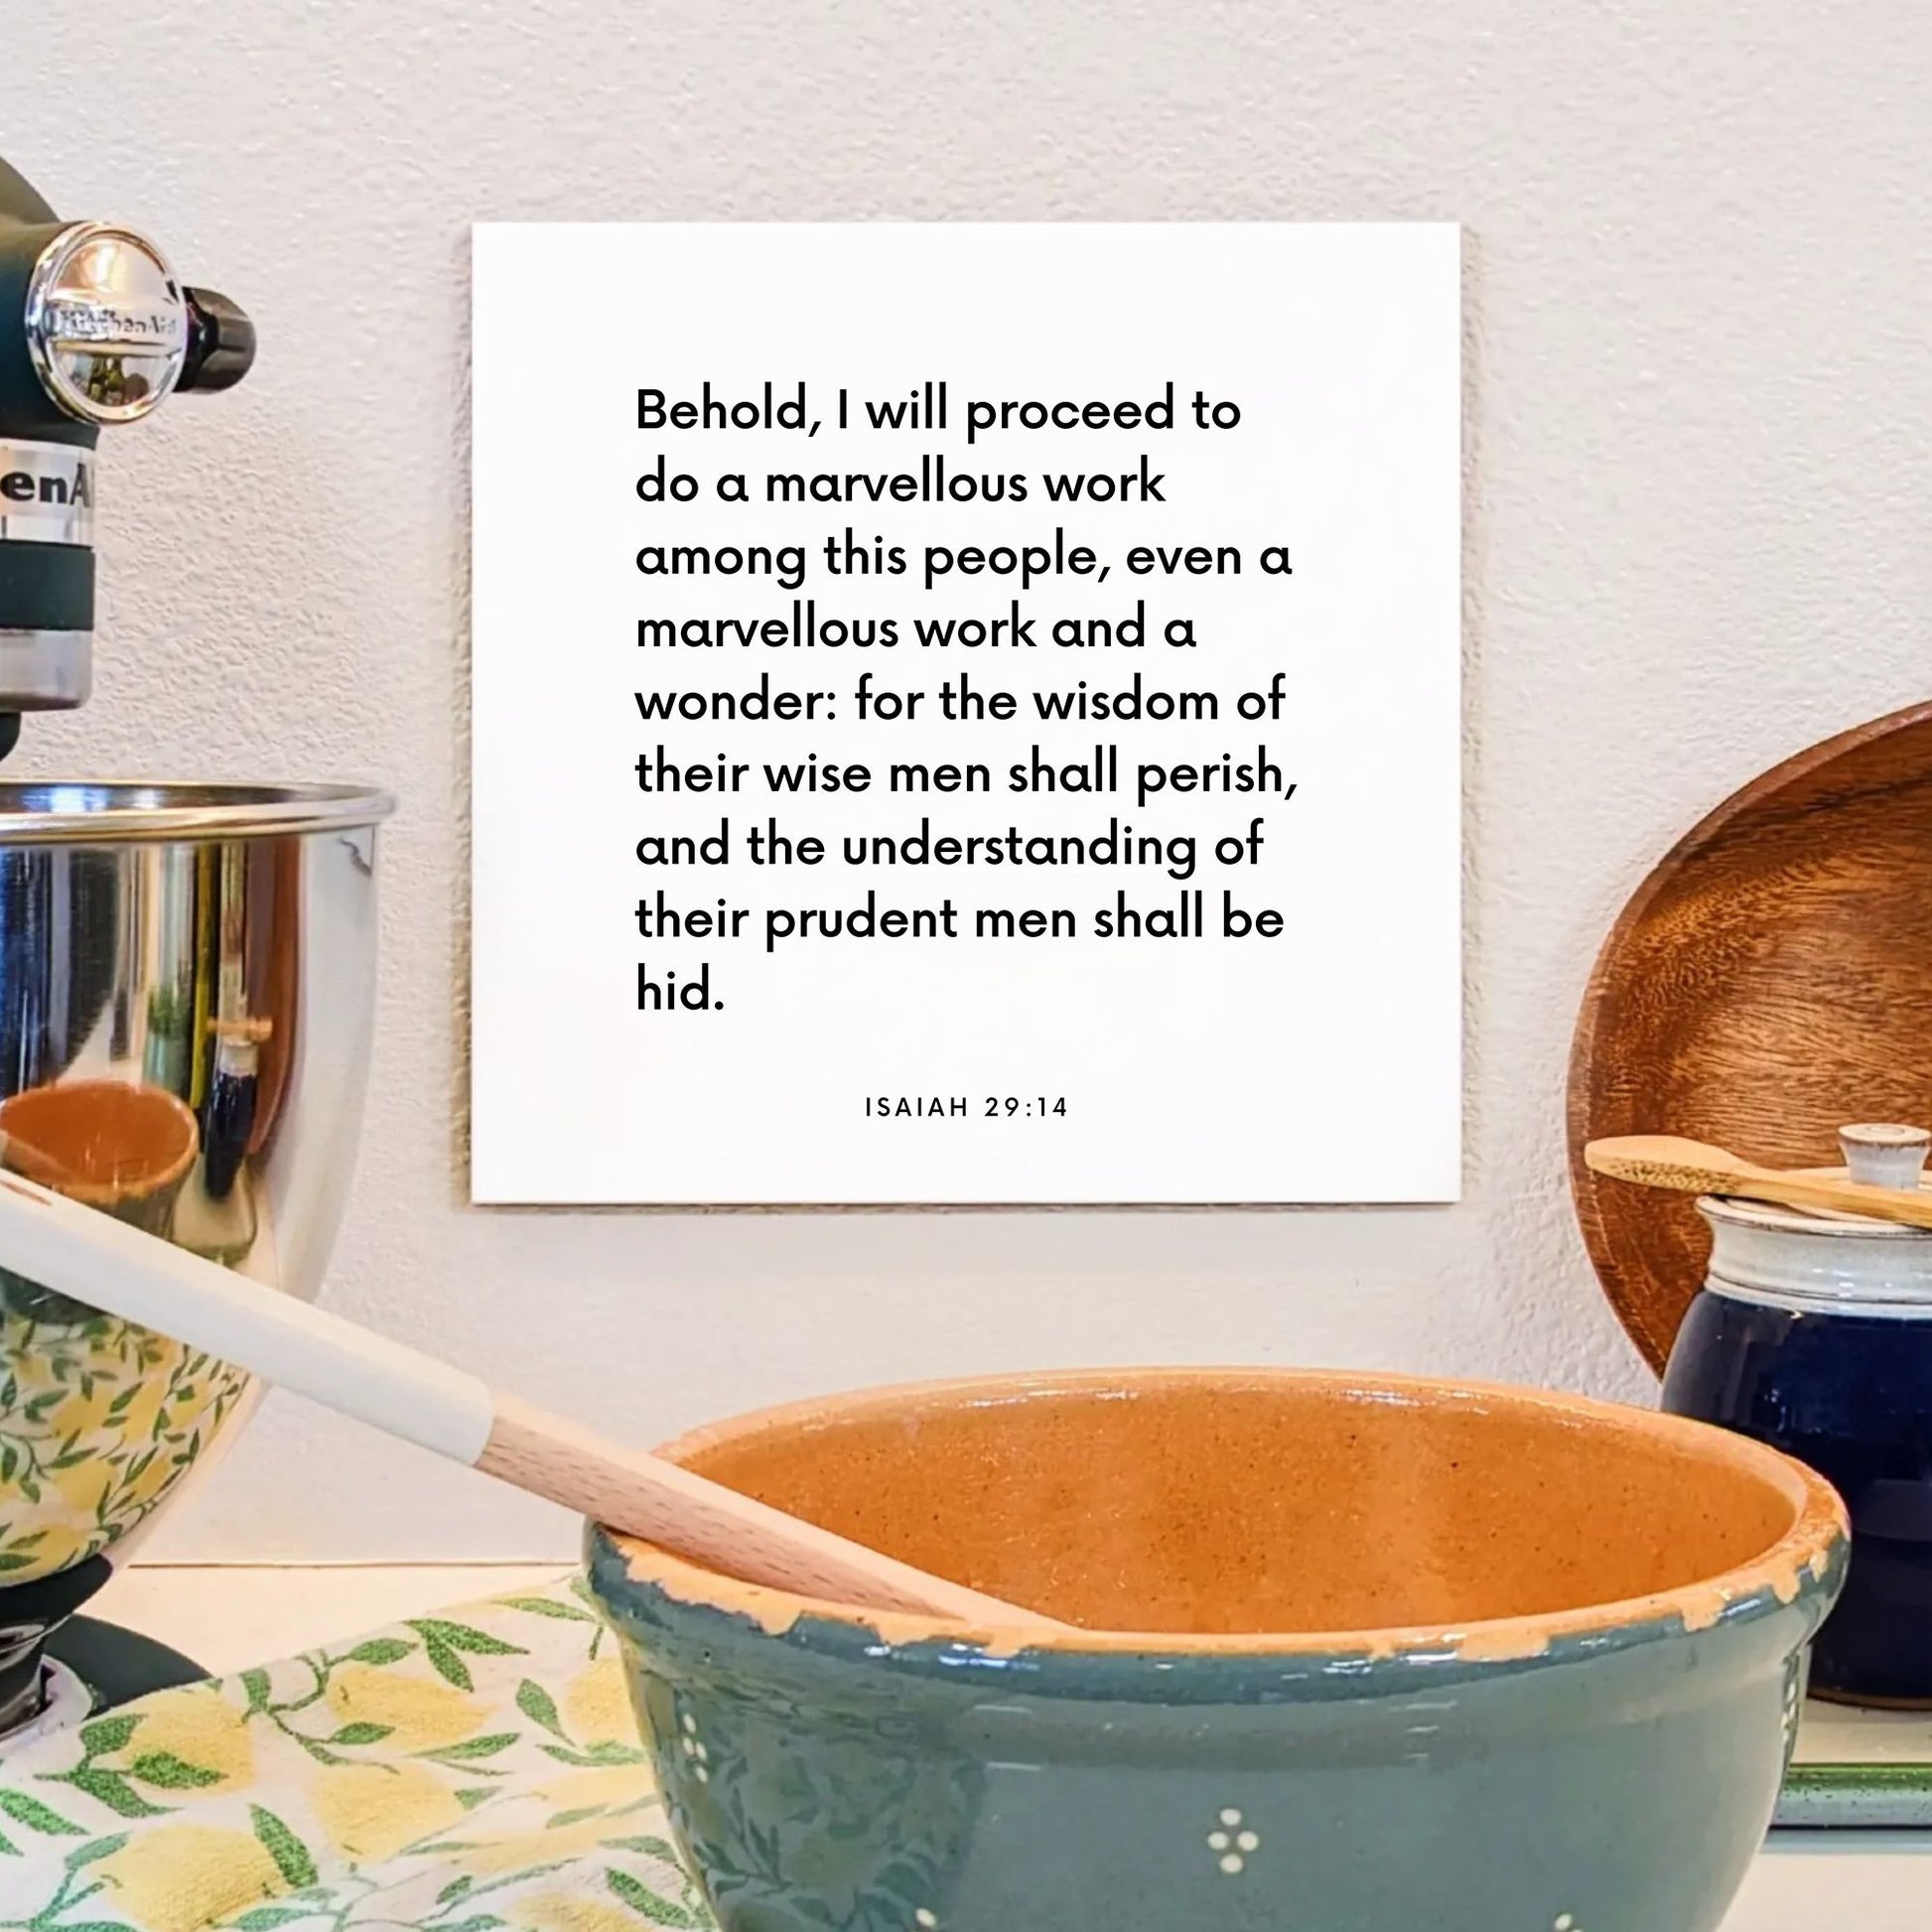 Kitchen mouting of the scripture tile for Isaiah 29:14 - "I will do a marvellous work and a wonder"